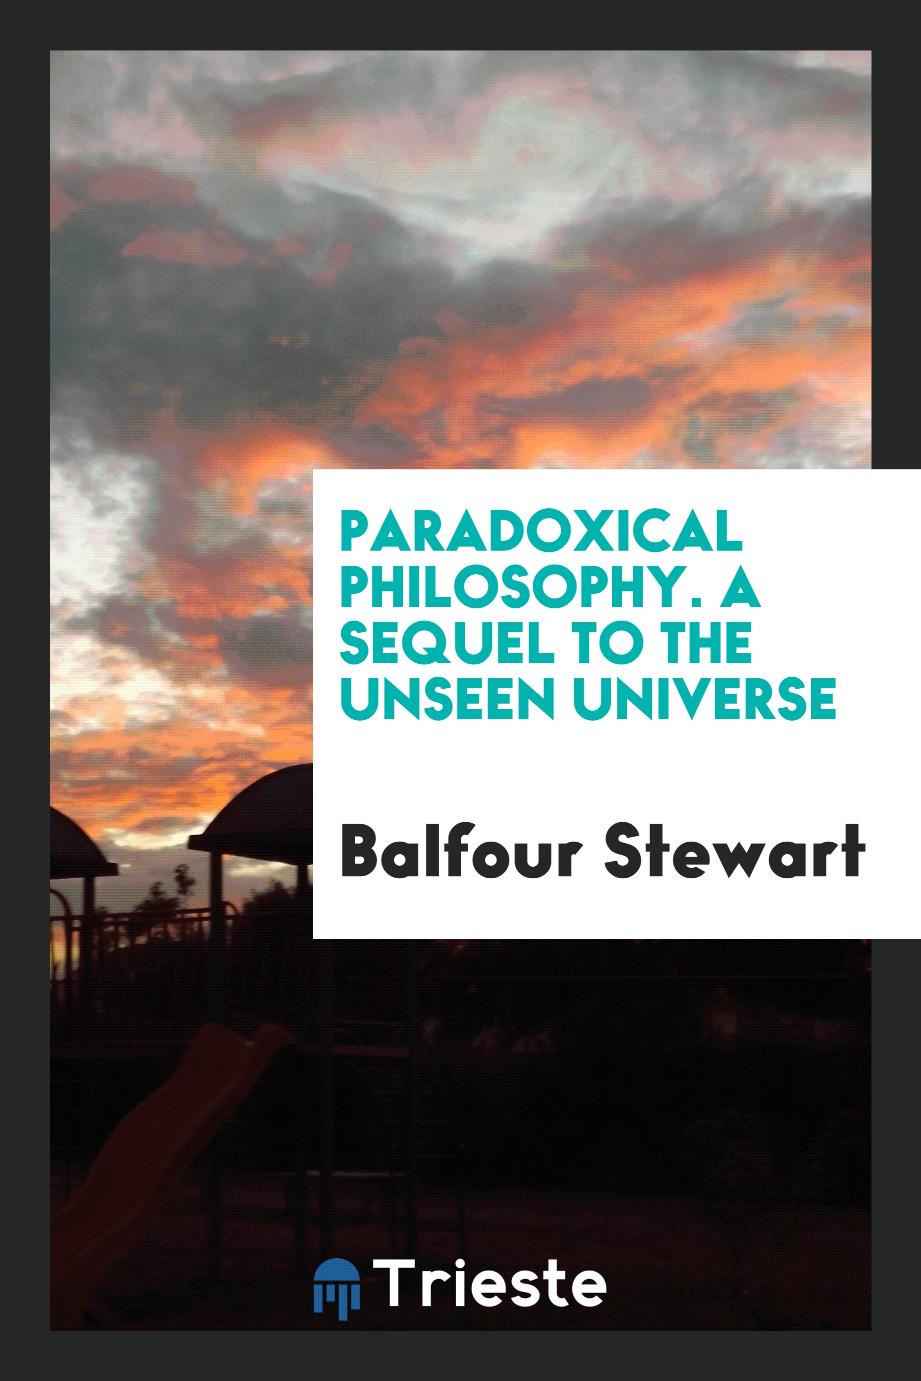 Paradoxical Philosophy. A Sequel to the Unseen Universe